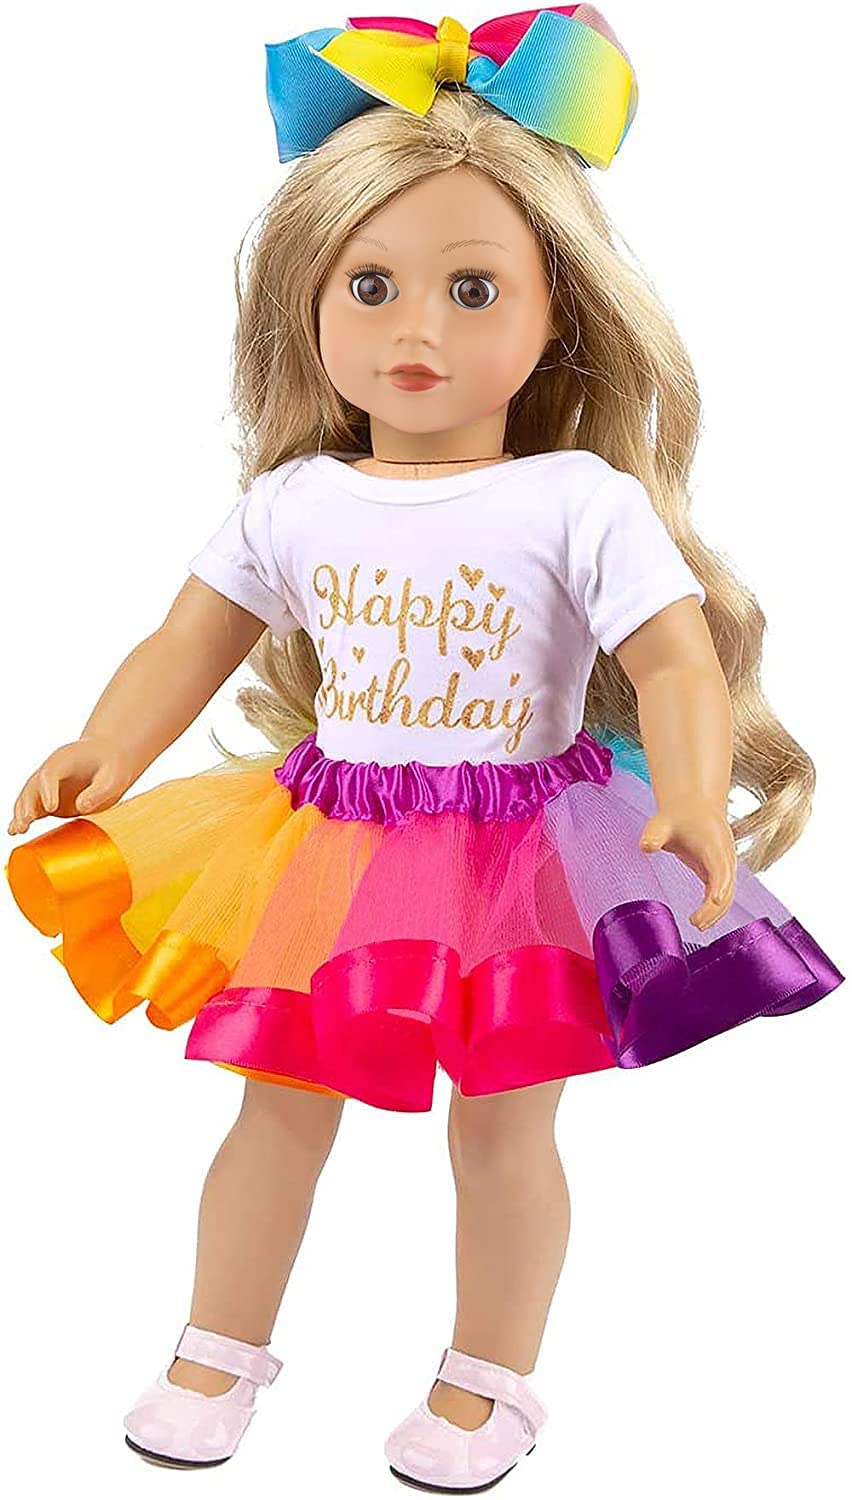 ZITA ELEMENT 18 in Girl Doll Clothes and Accessories Set - 1 Rainbow Tutu, 1 Jumpsuit and 1 Unicorn Headband for 18 Inch Dolls Girls Birthday